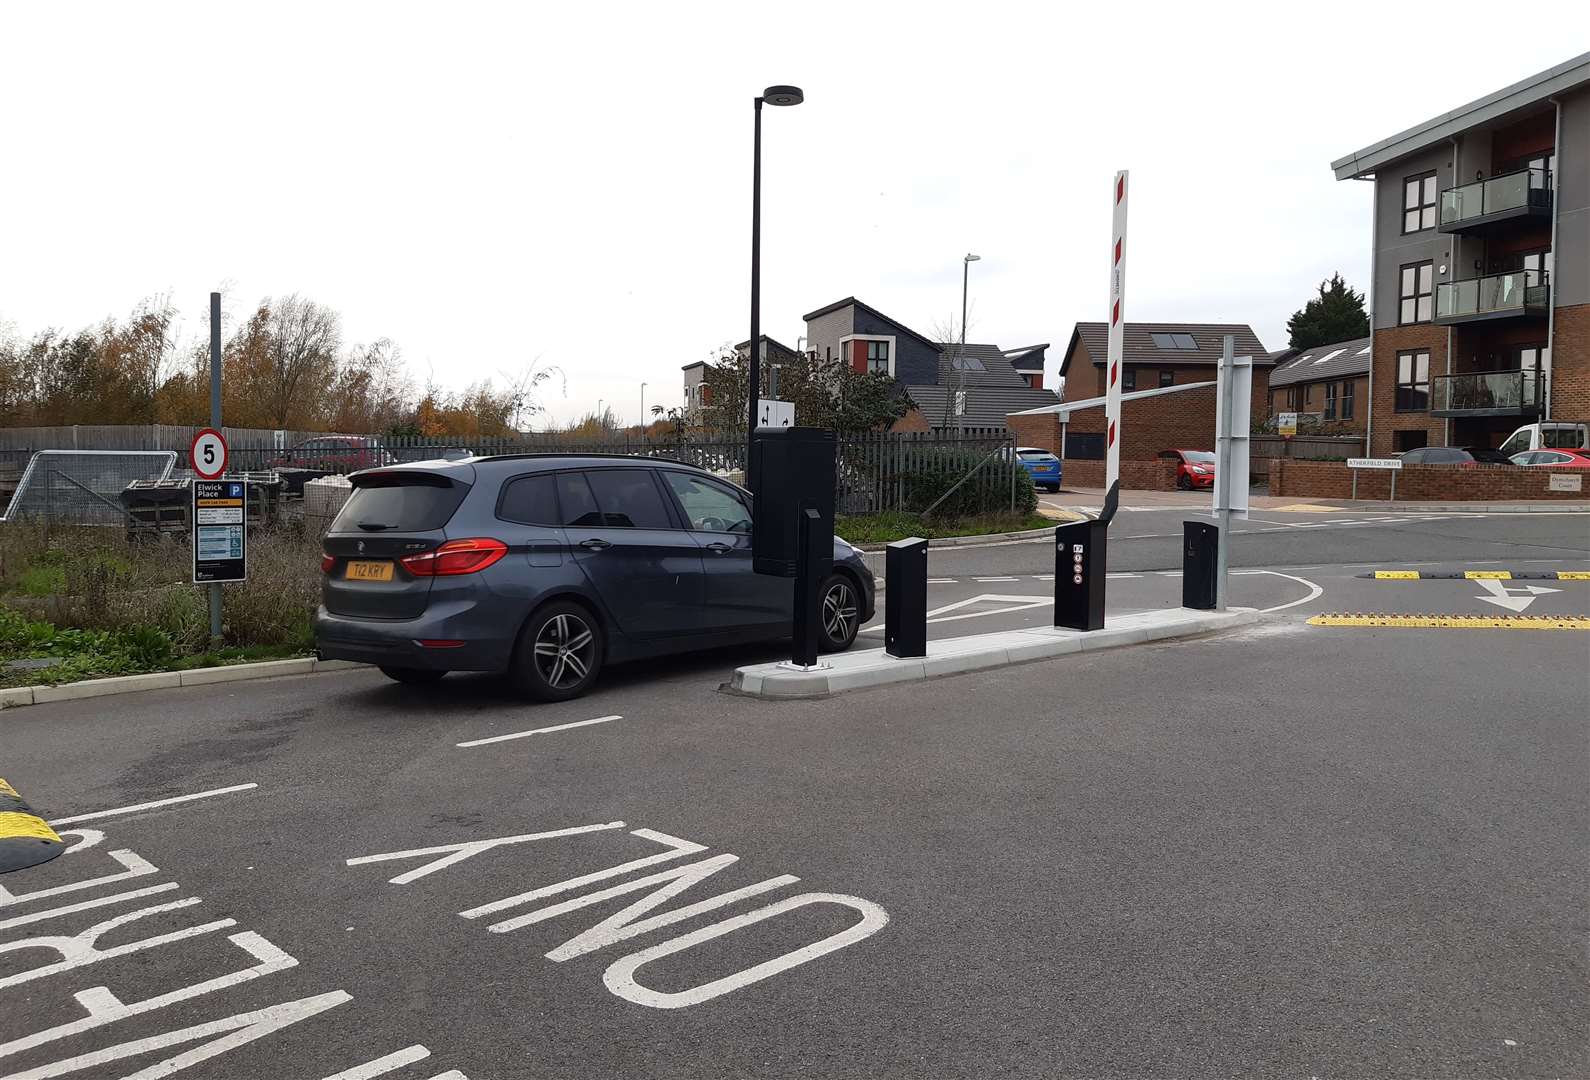 Barriers were installed at the Elwick Place car park in November